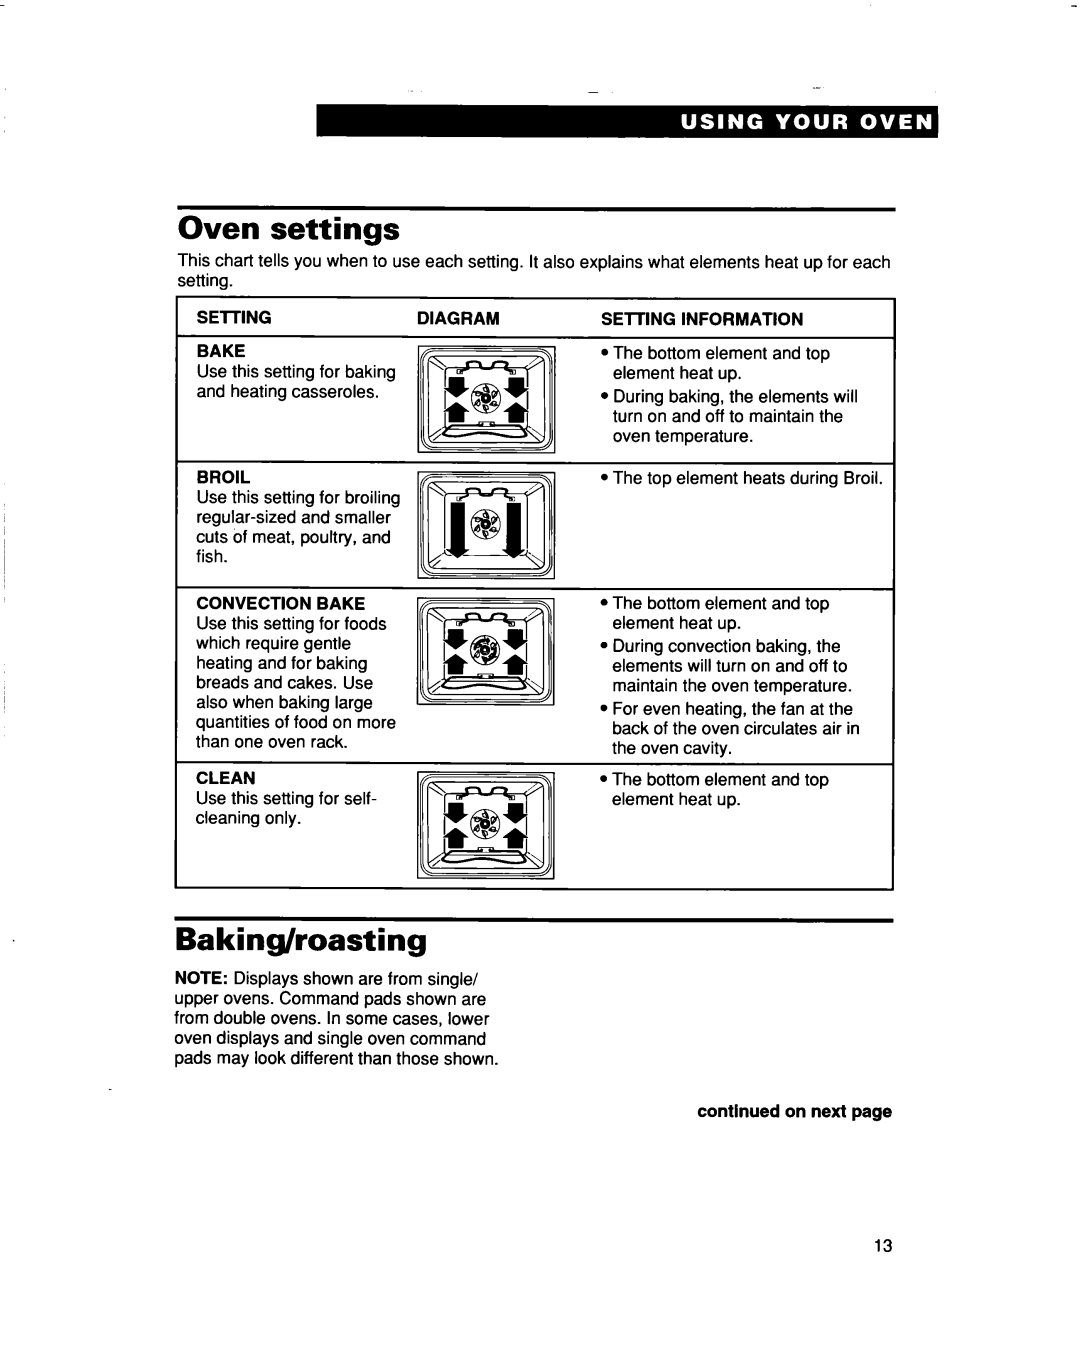 Whirlpool RBS277PD Oven settings, Baking/roasting, SElTINGDIAGRAM BAKE, Broil, Convection Bake, Clean, SElTlNG INFORMATION 